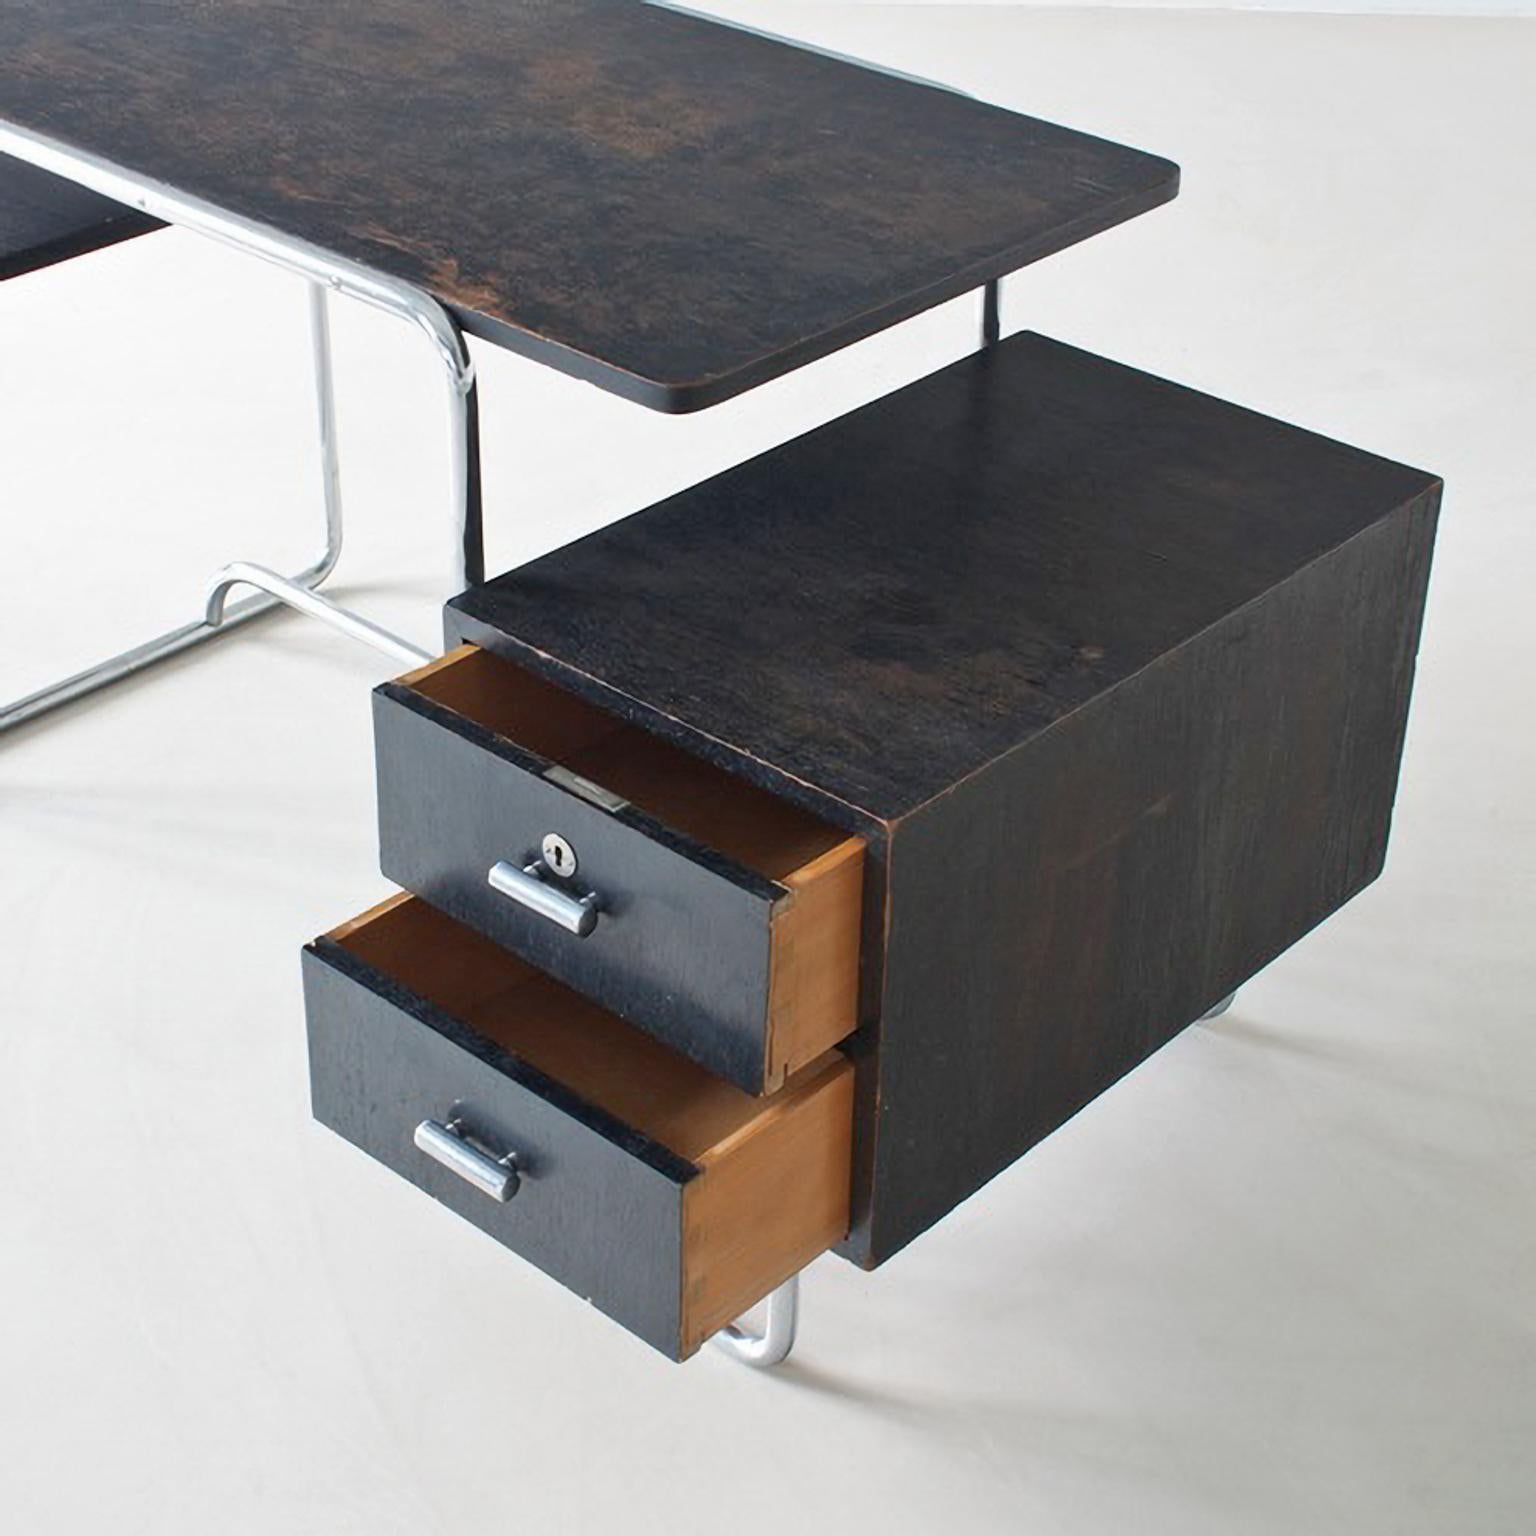 Contemporary Modernist Tubular Steel Desk, Stained Wood, Chromium Plated Metall, c. 1930 For Sale